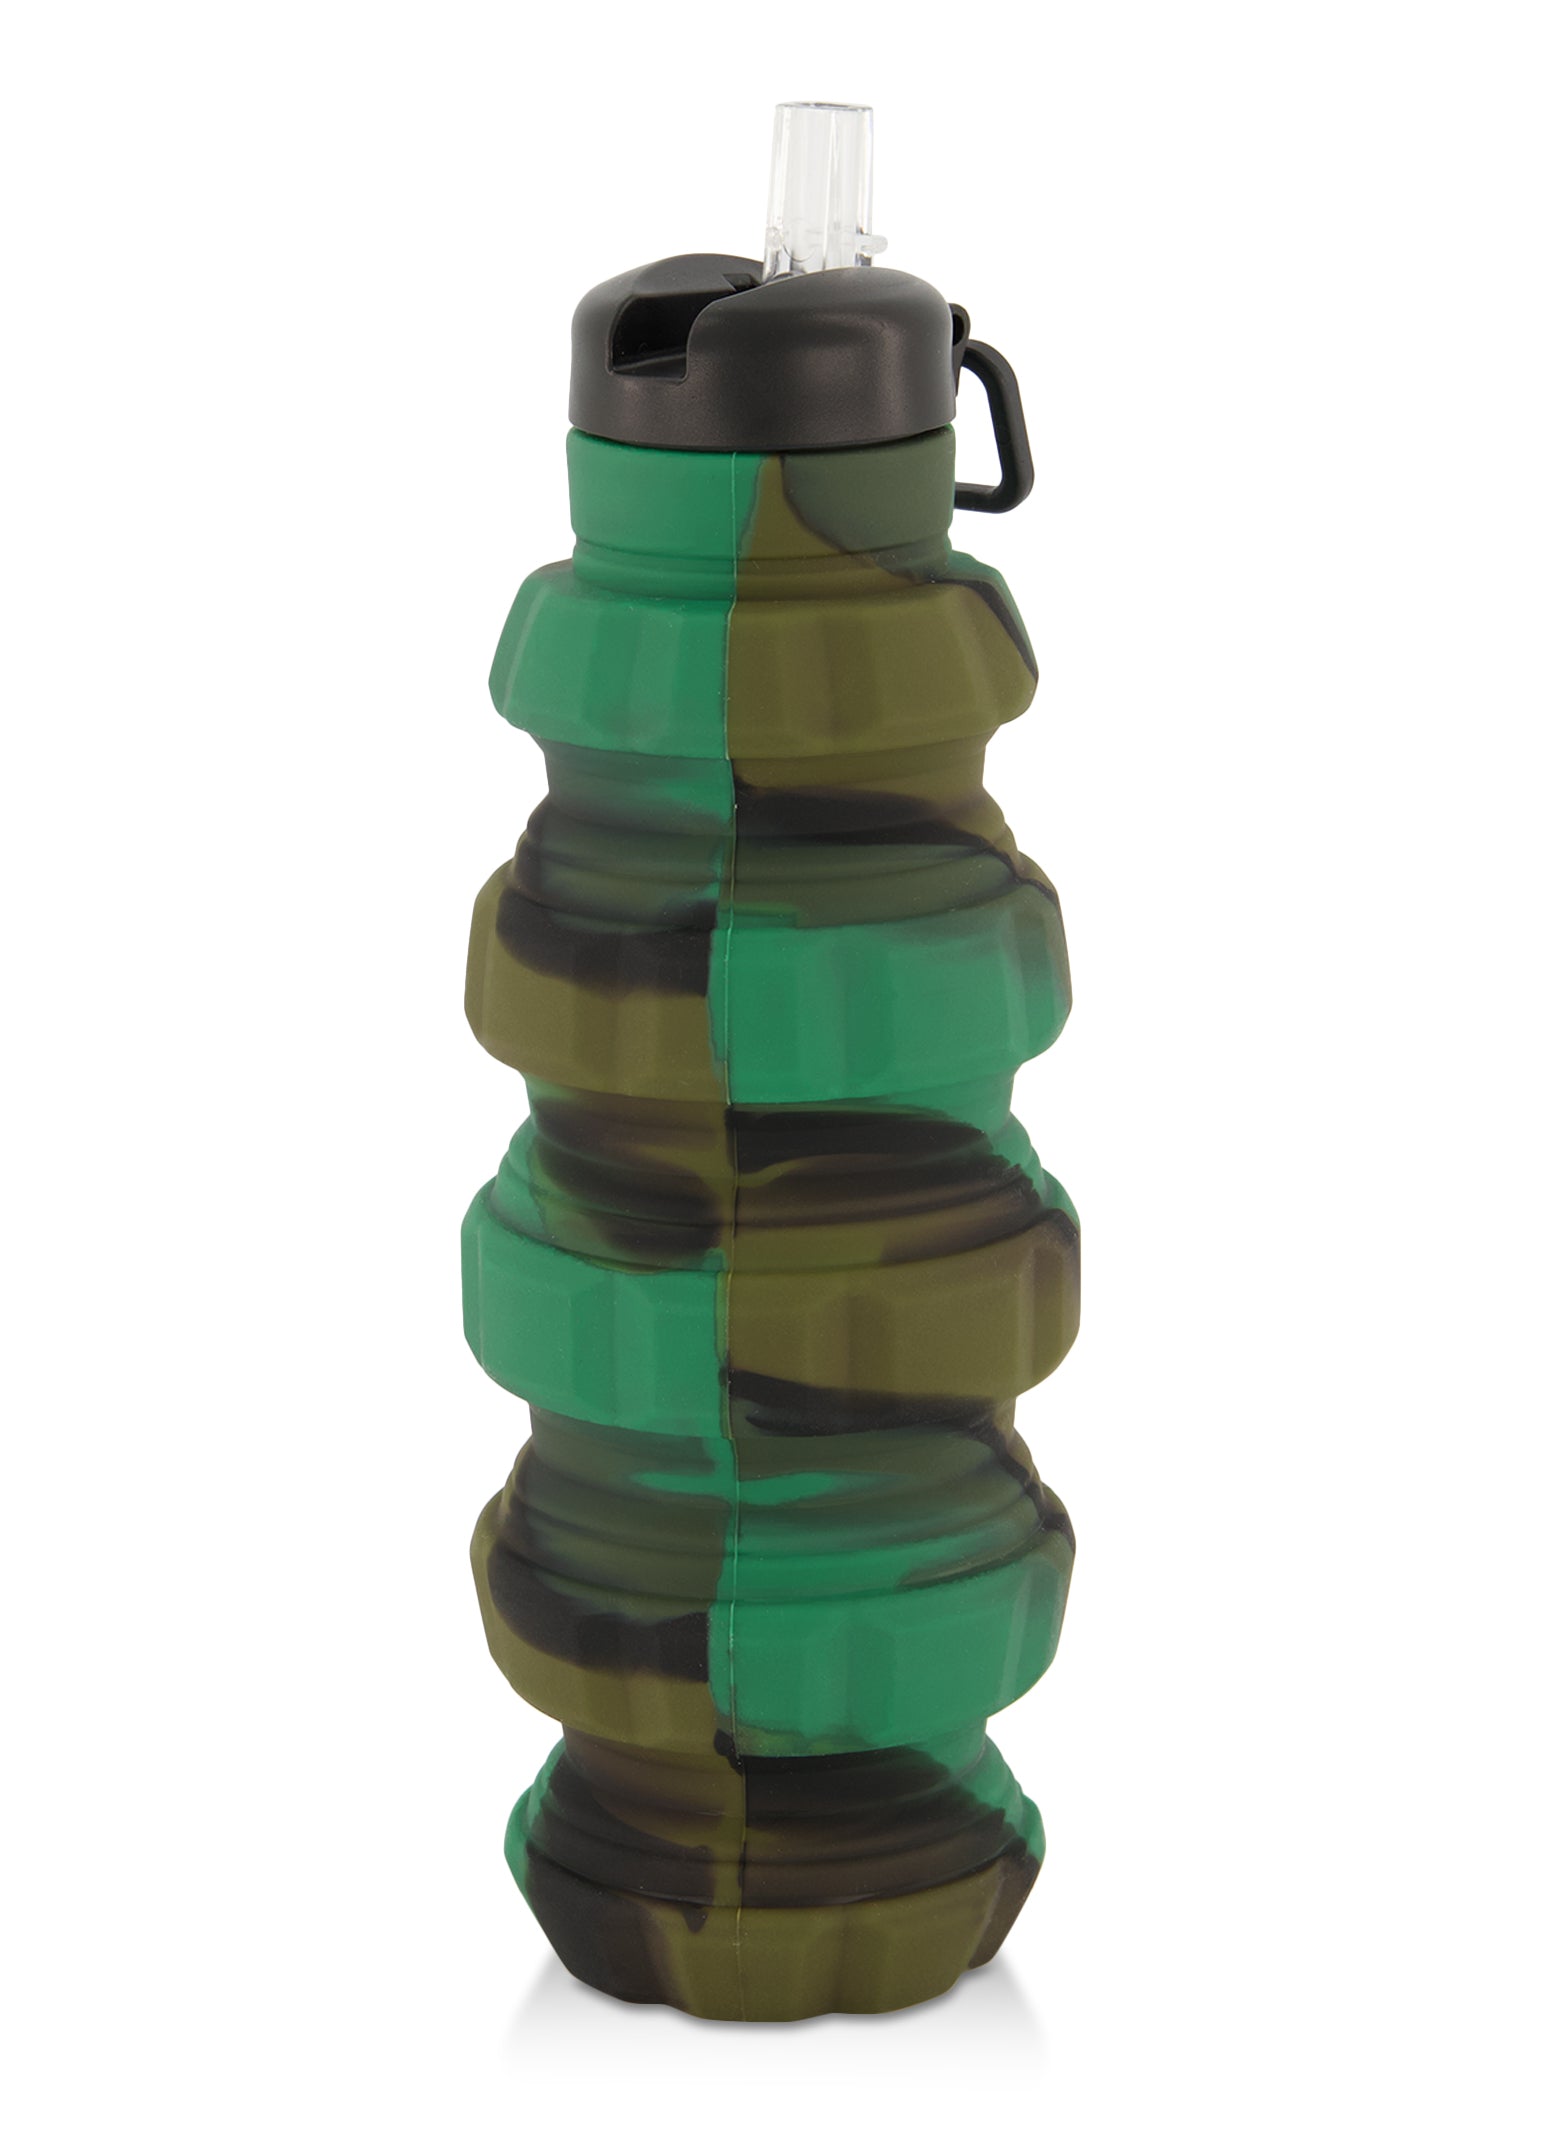 Grenade Collapsible Water Bottle